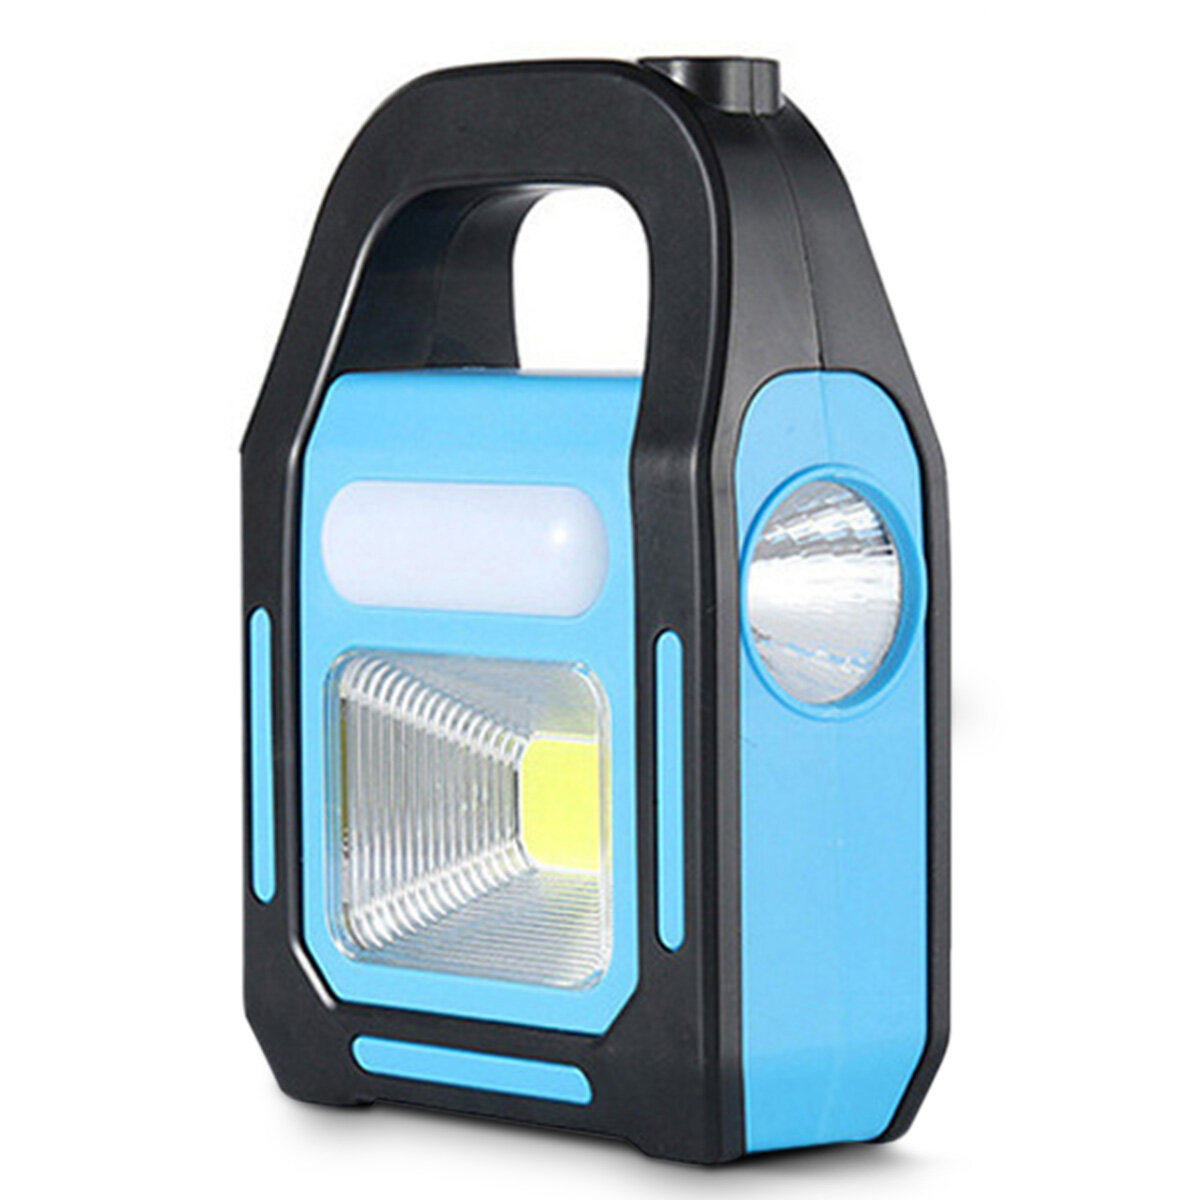 Portable Solar Lantern COB LED Work Lamp Emergency Spotlight USB Rechargeable Handlamp Searchlight for Outdoor Hiking Camping